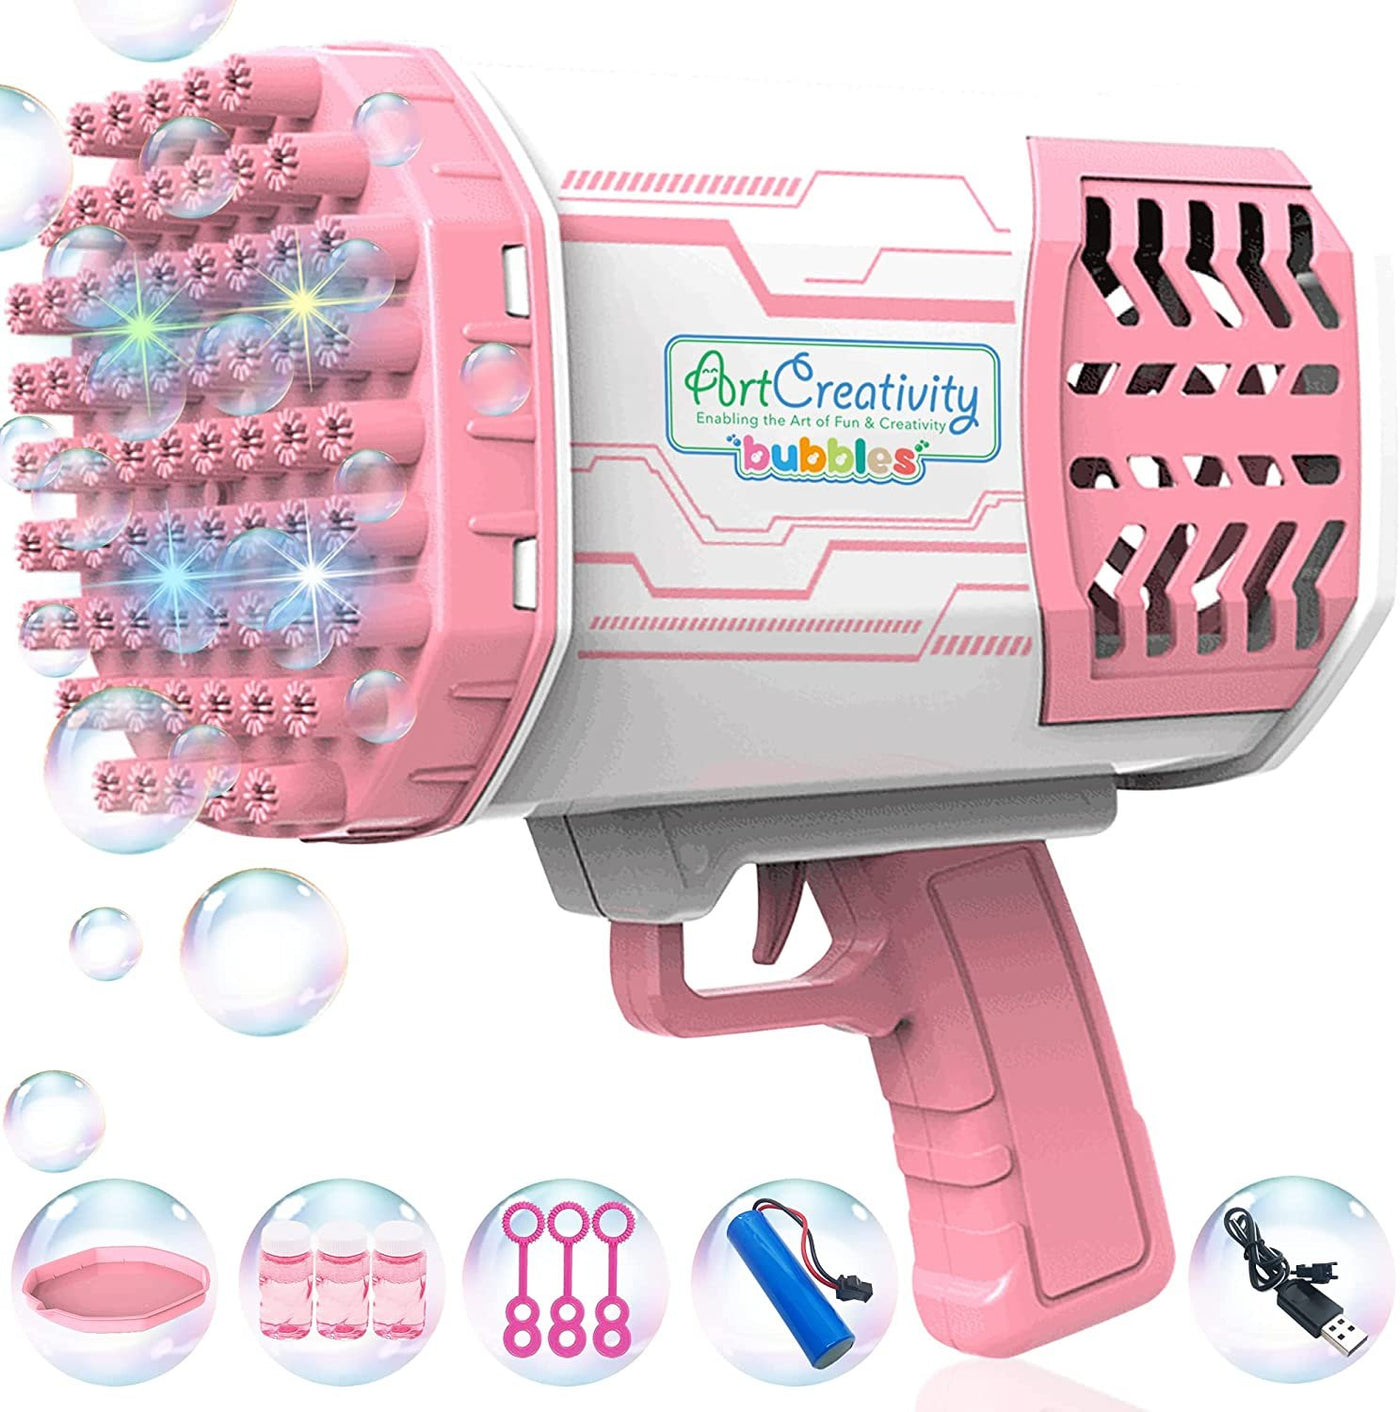 Get Quality dinosaur bubble gun For An Exciting Time 